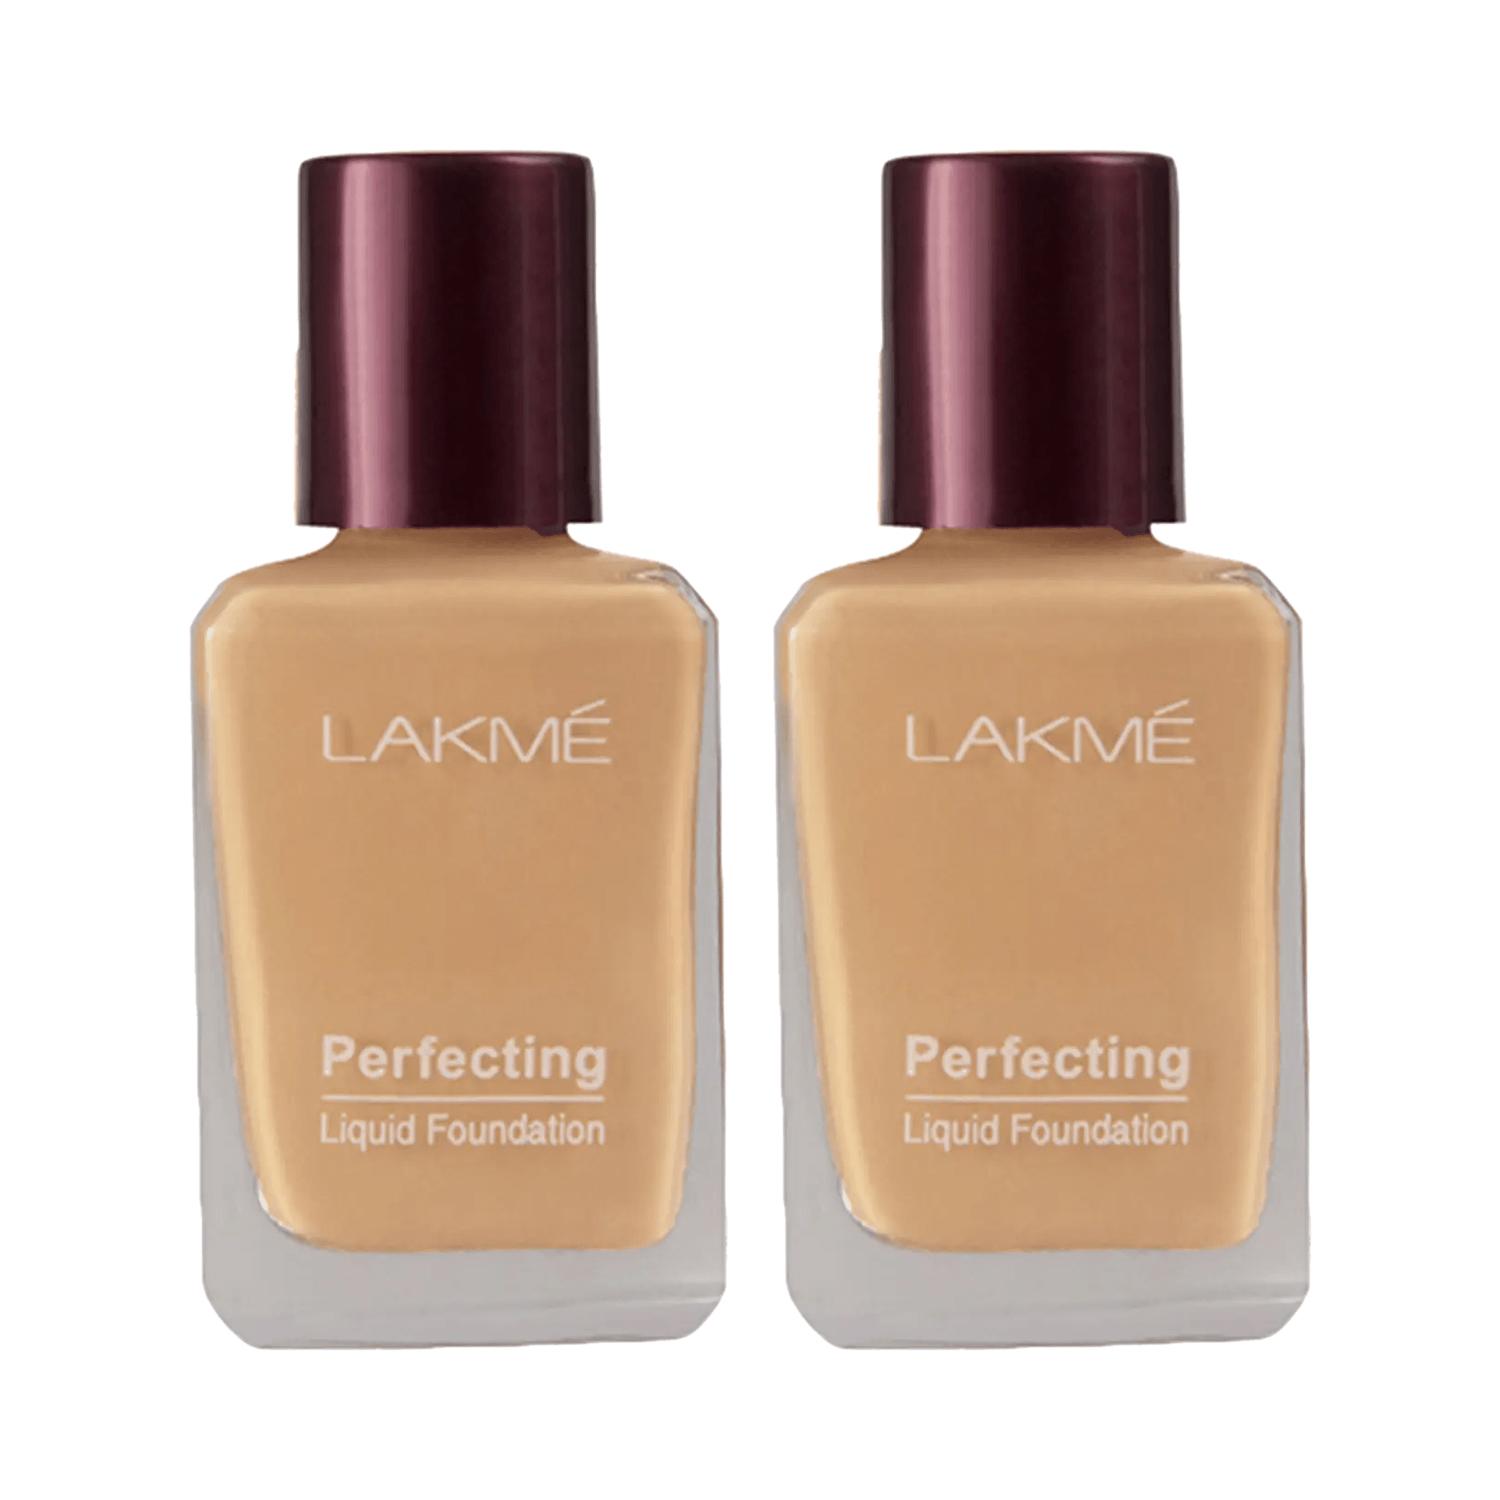 Lakme | Lakme Perfecting Liquid Foundation Natural Pearl (27 ml) - (Pack of 2)